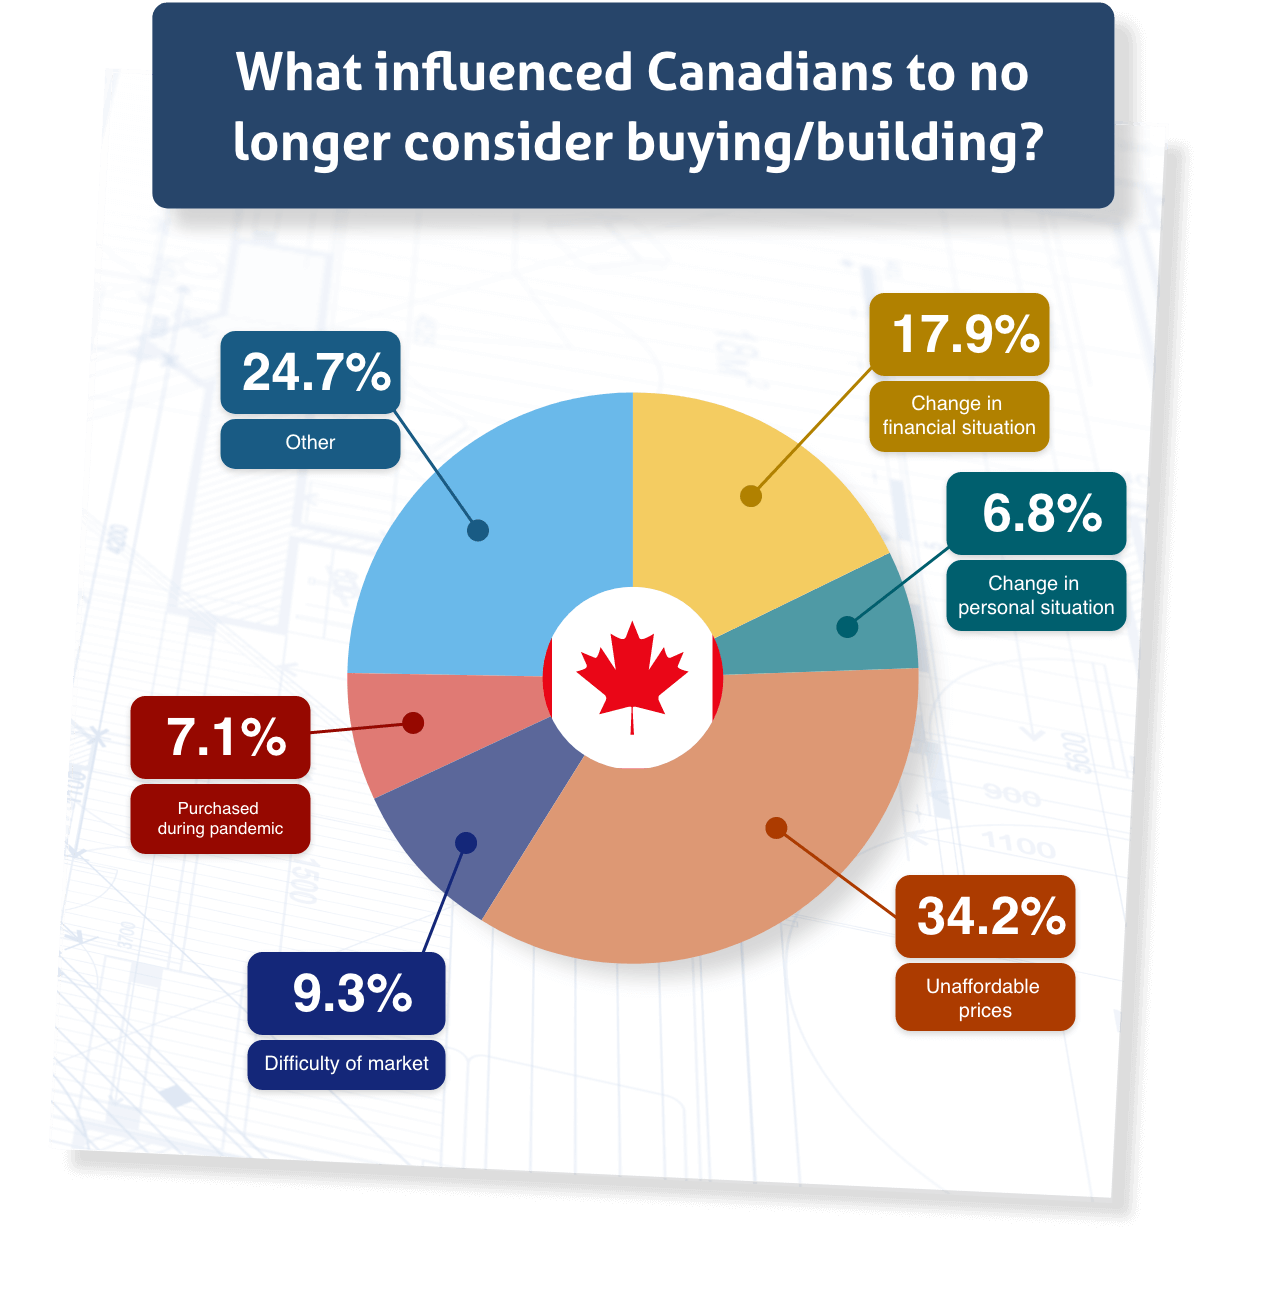 A chart showing what different factors influenced Canadians to no longer consider buying or building a new home during the pandemic.